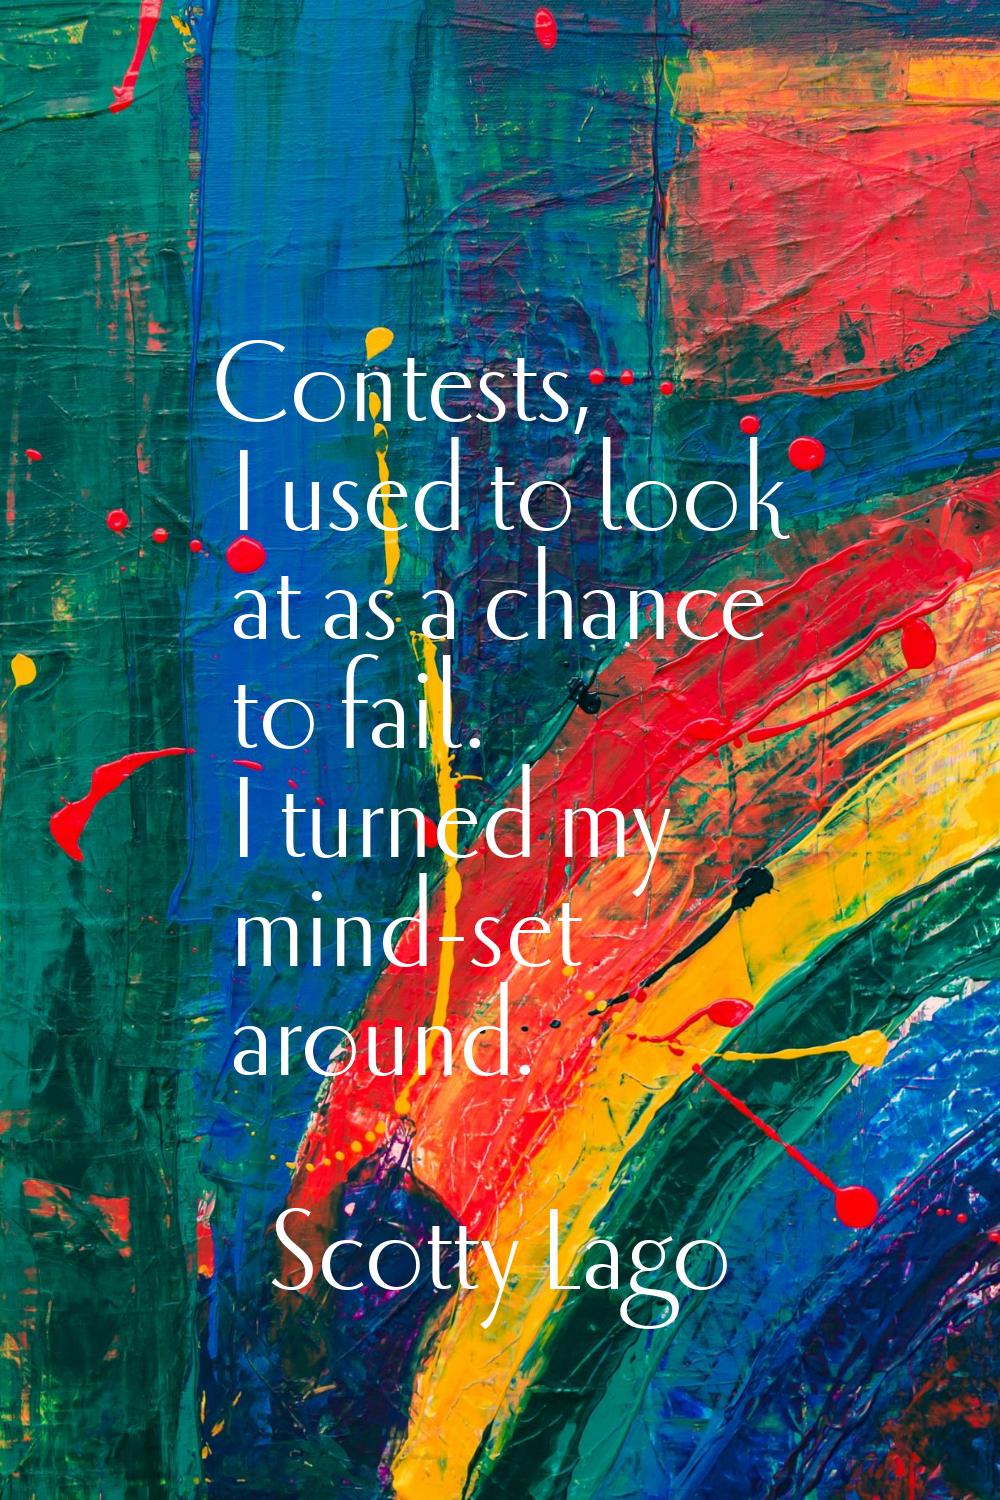 Contests, I used to look at as a chance to fail. I turned my mind-set around.